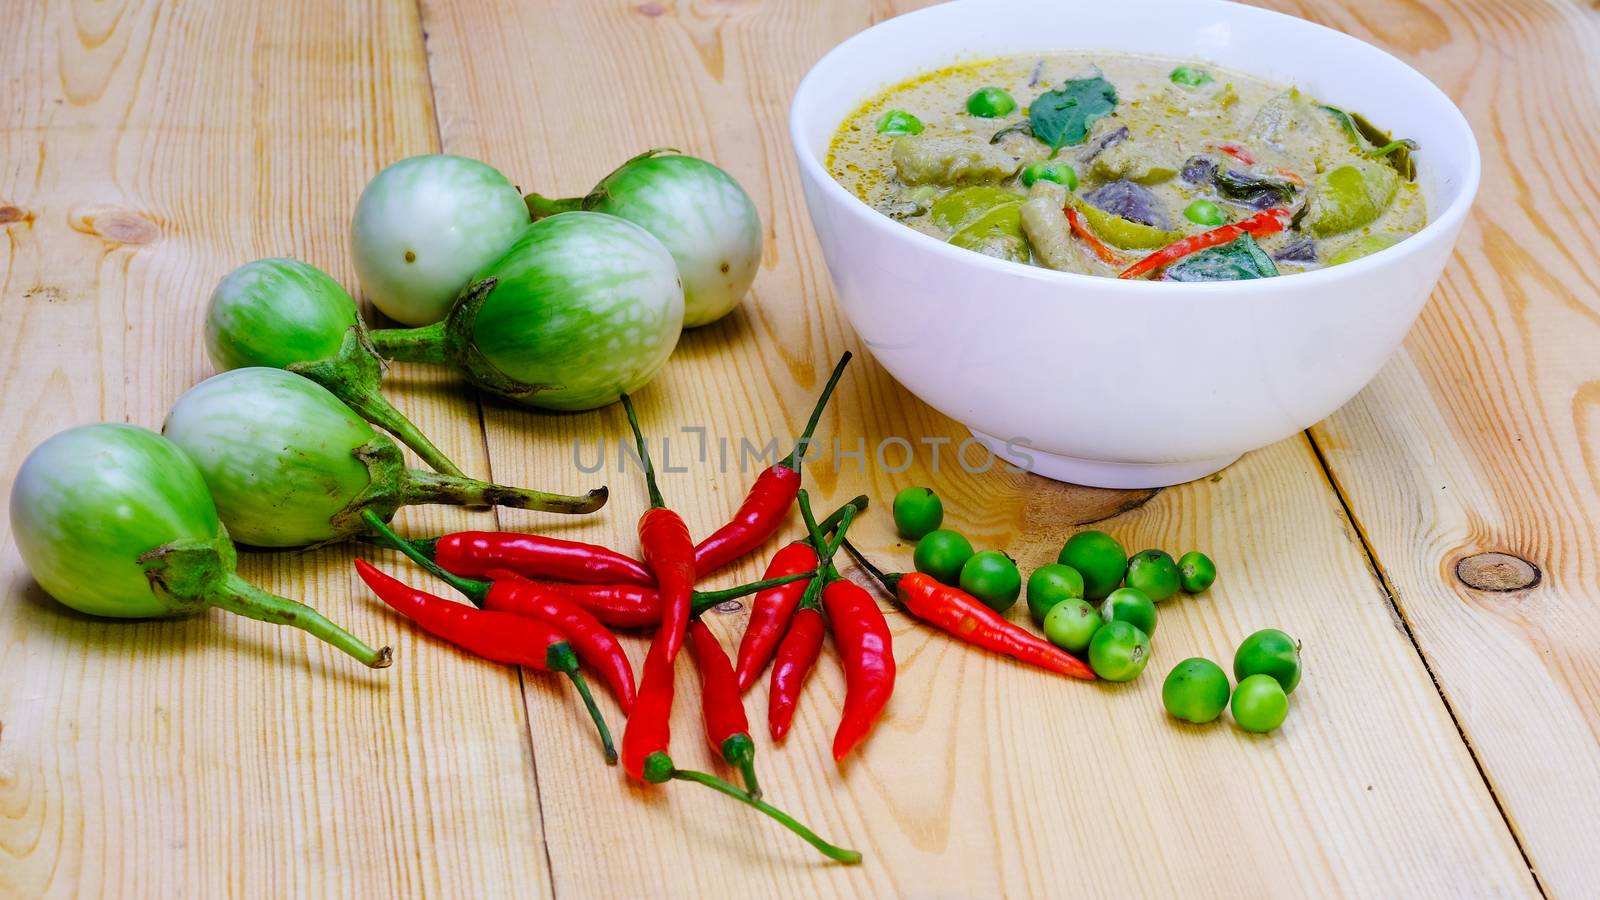 Ingredients for making famous Thai Green Curry with Chicken dish include, red and green chilli, holy basil leaves, kaffir lime leaves, turkey berry, and eggplant